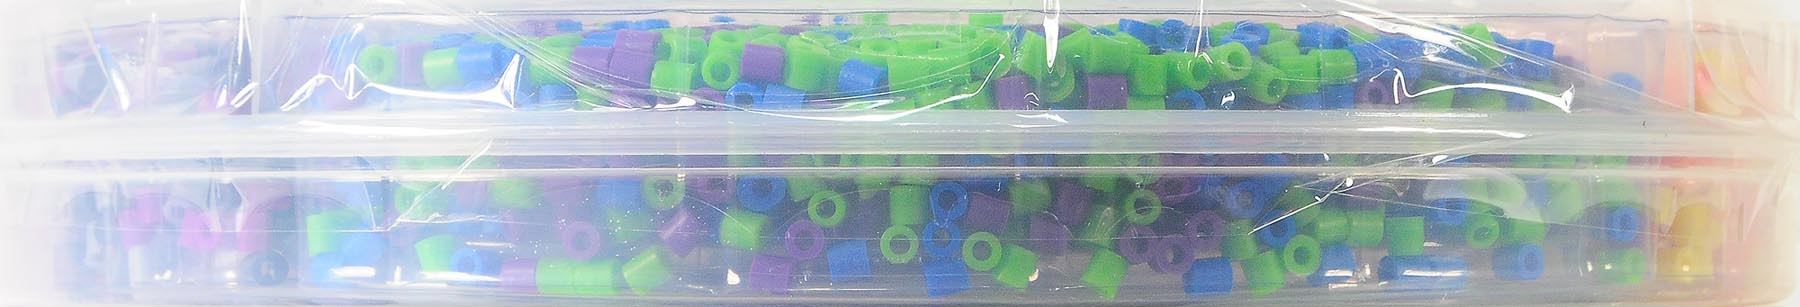 Go Create Ultimate Craft Melty Beads Activity Kit, 8,500 Beads